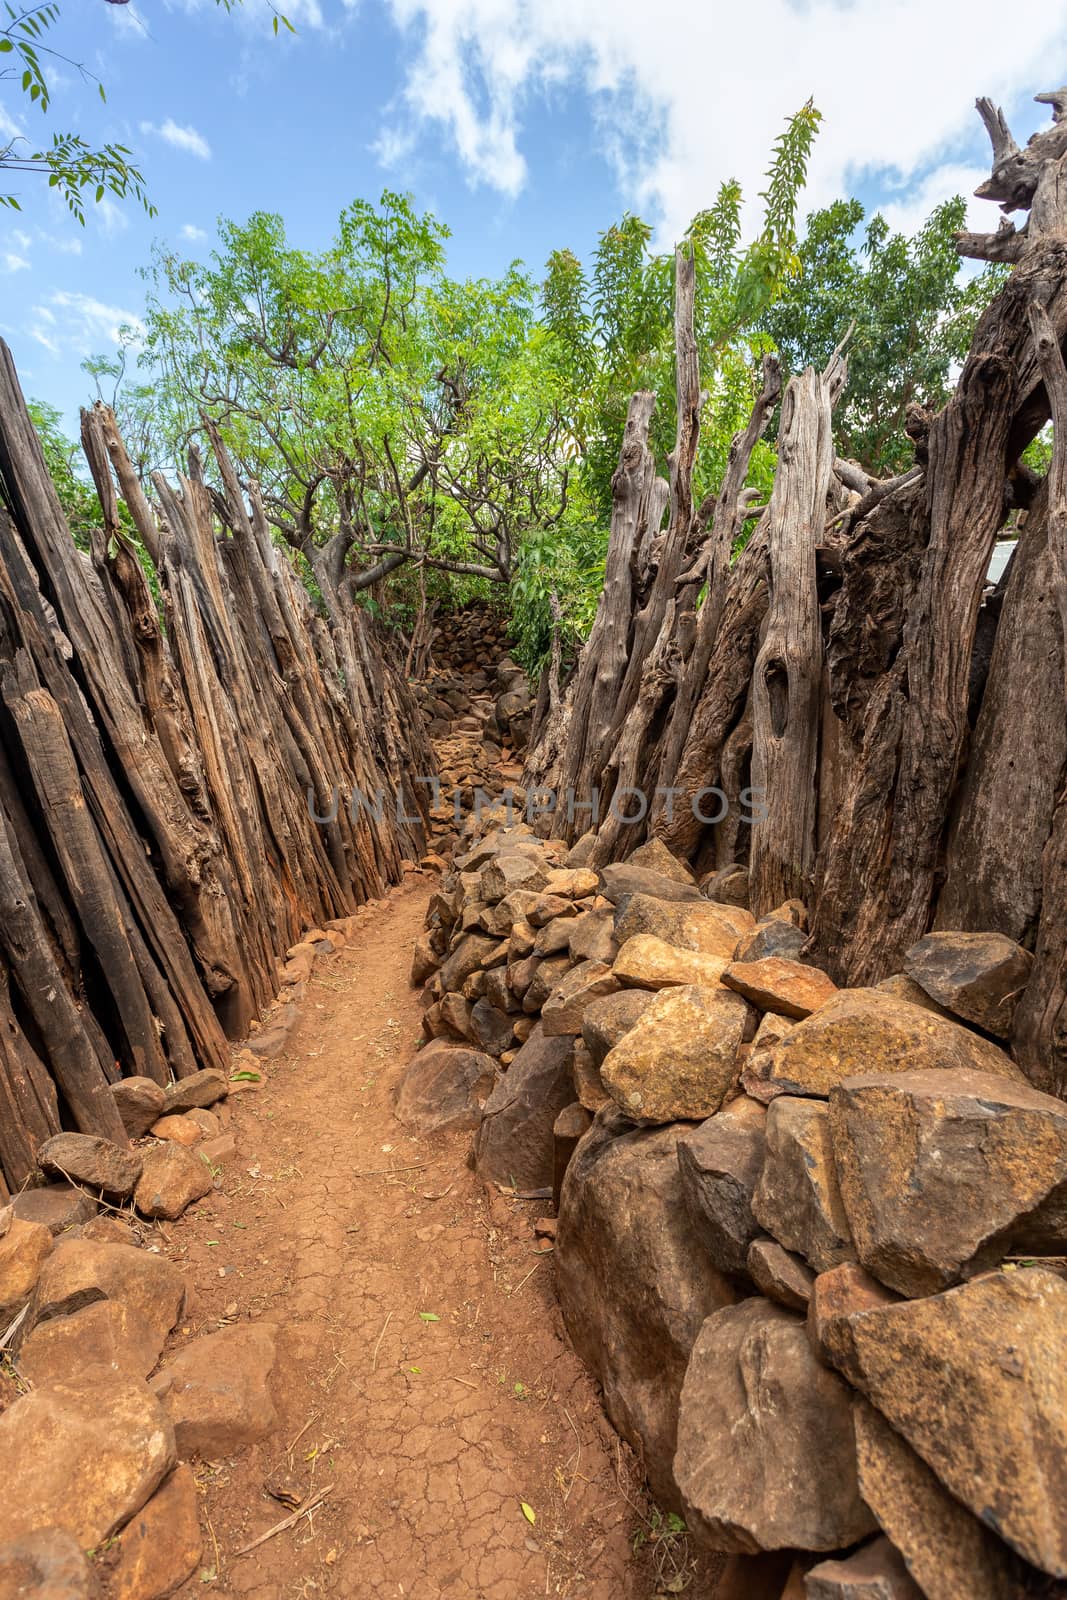 Narrow pathway in Konso, walled village tribes Konso. Africa, Ethiopia. Konso villages are listed as UNESCO World Heritage sites.